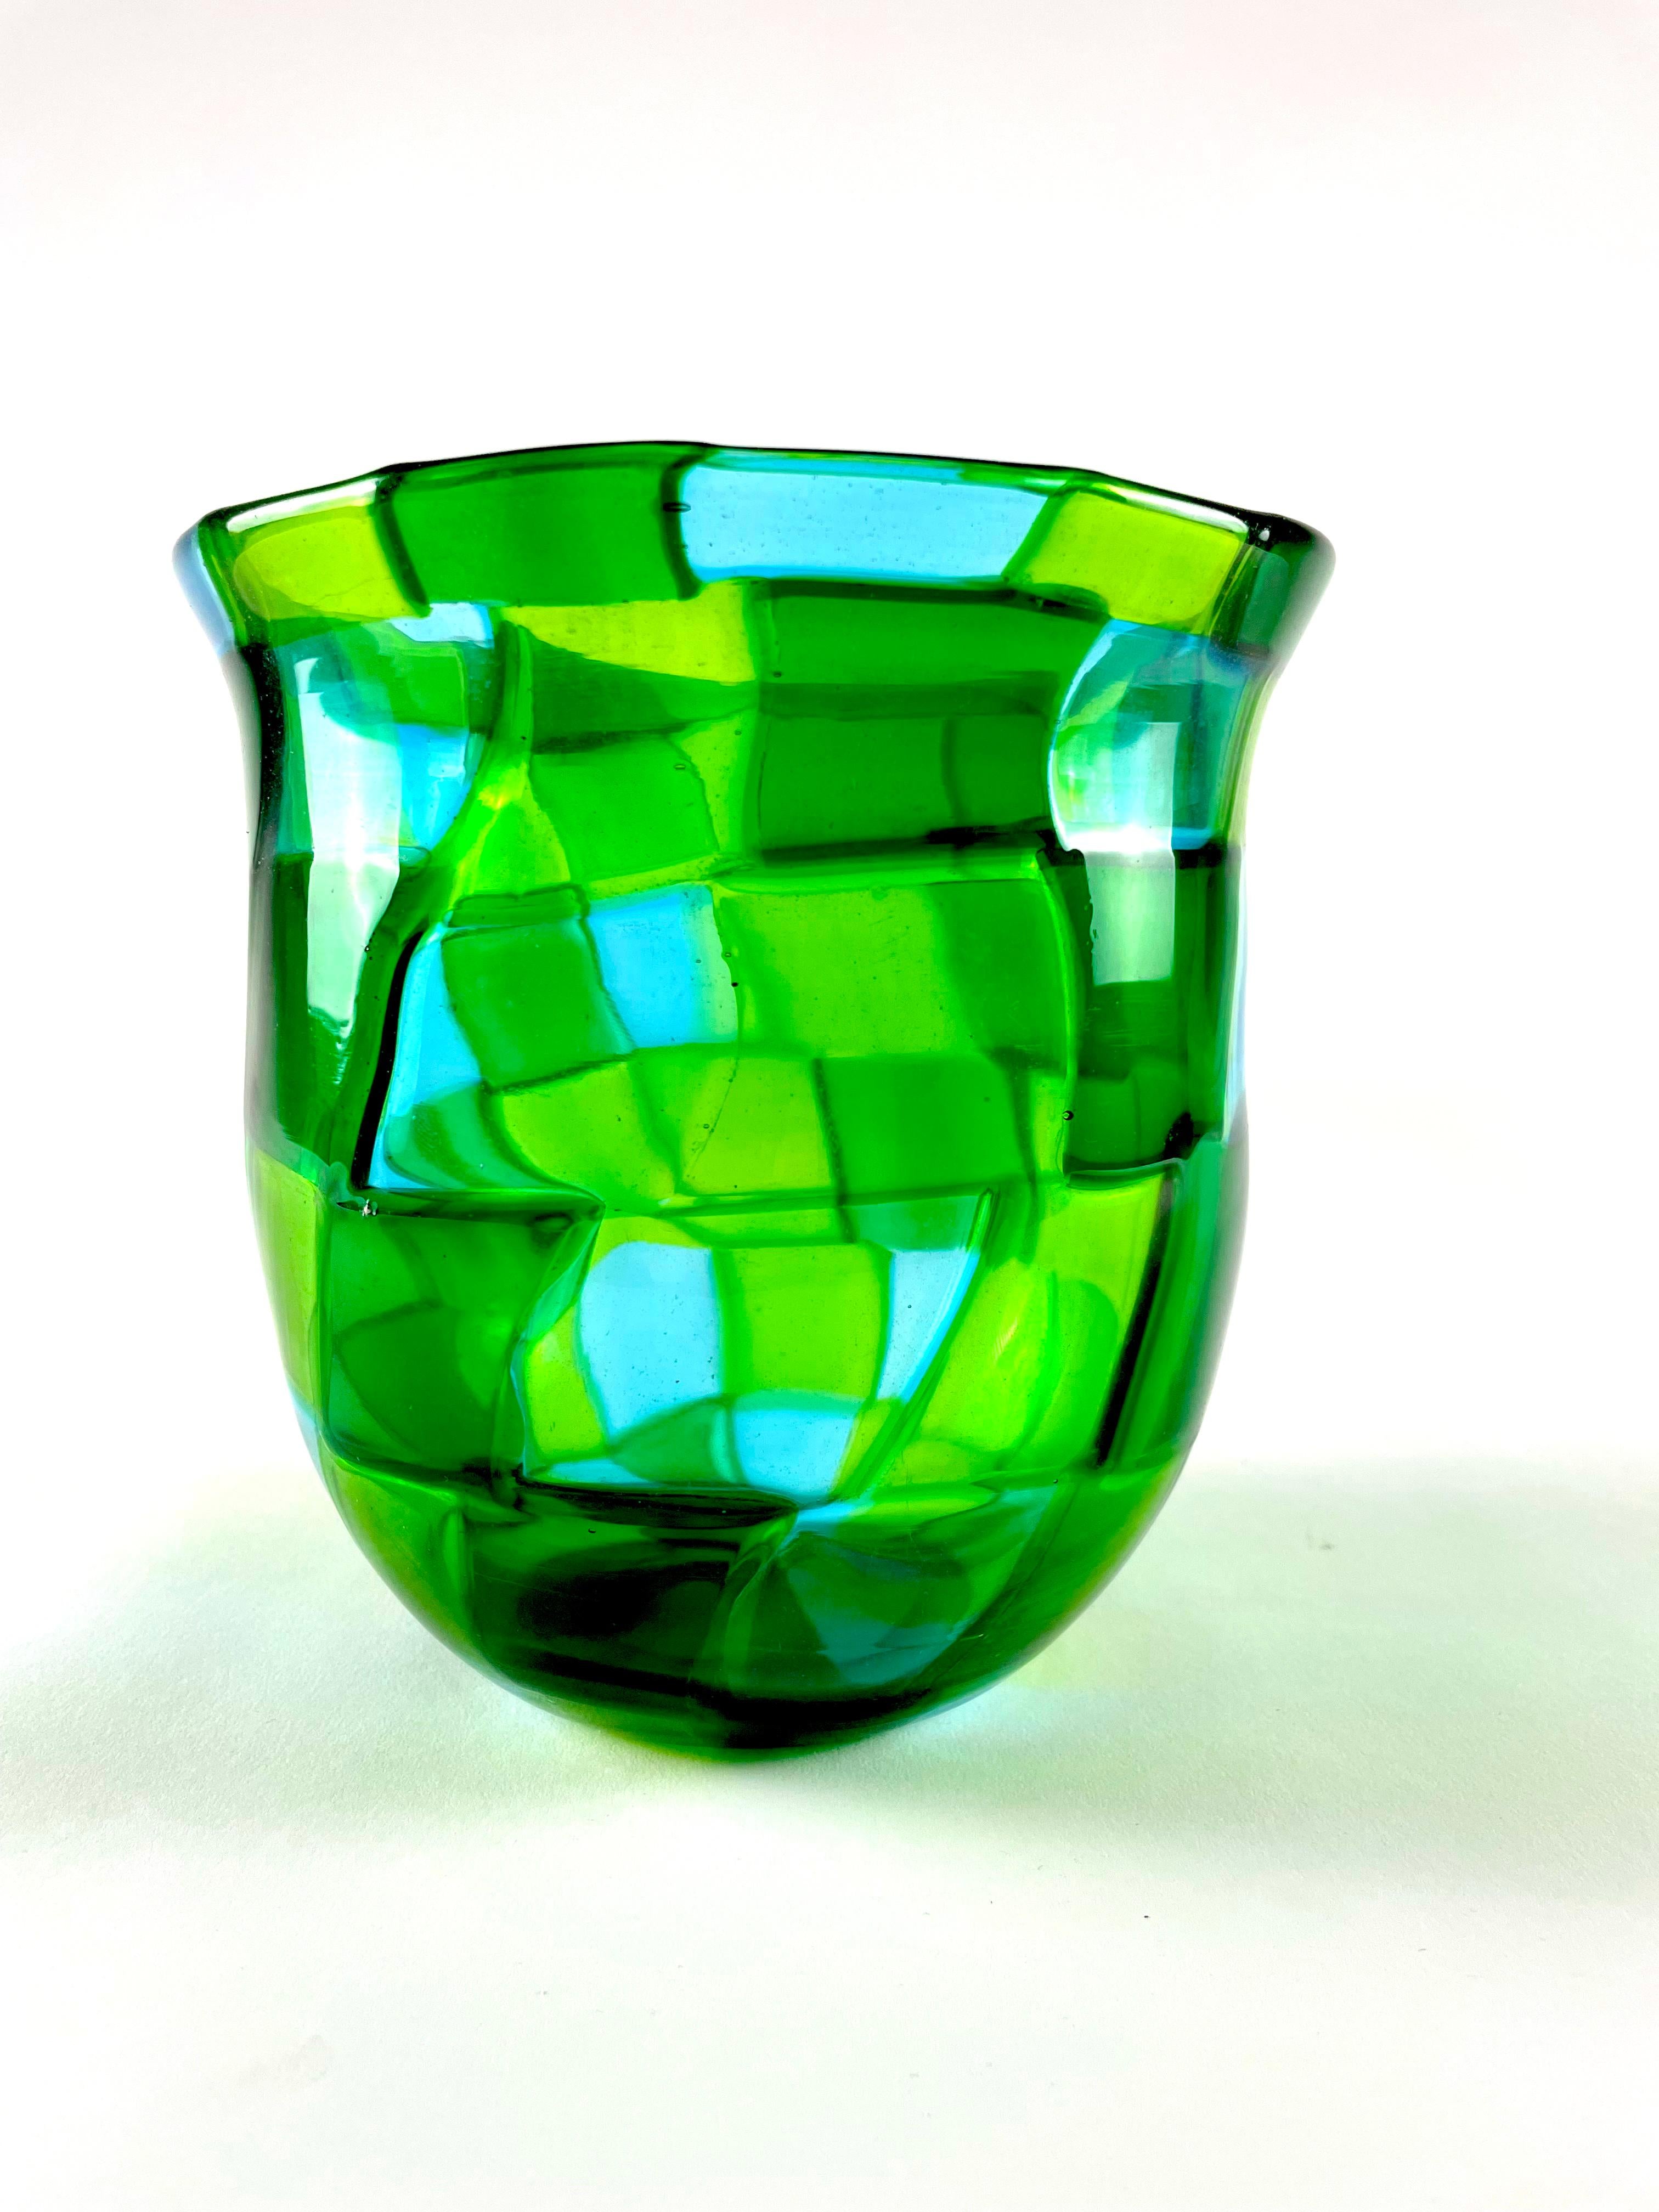 Get ready to be mesmerized by Tessere, a vintage collectible design by Ermanno Toso for Fratelli Toso in the late '70s. This stunning glass creation is a representation of the iconic design of Murano in those years, with its play of colors and